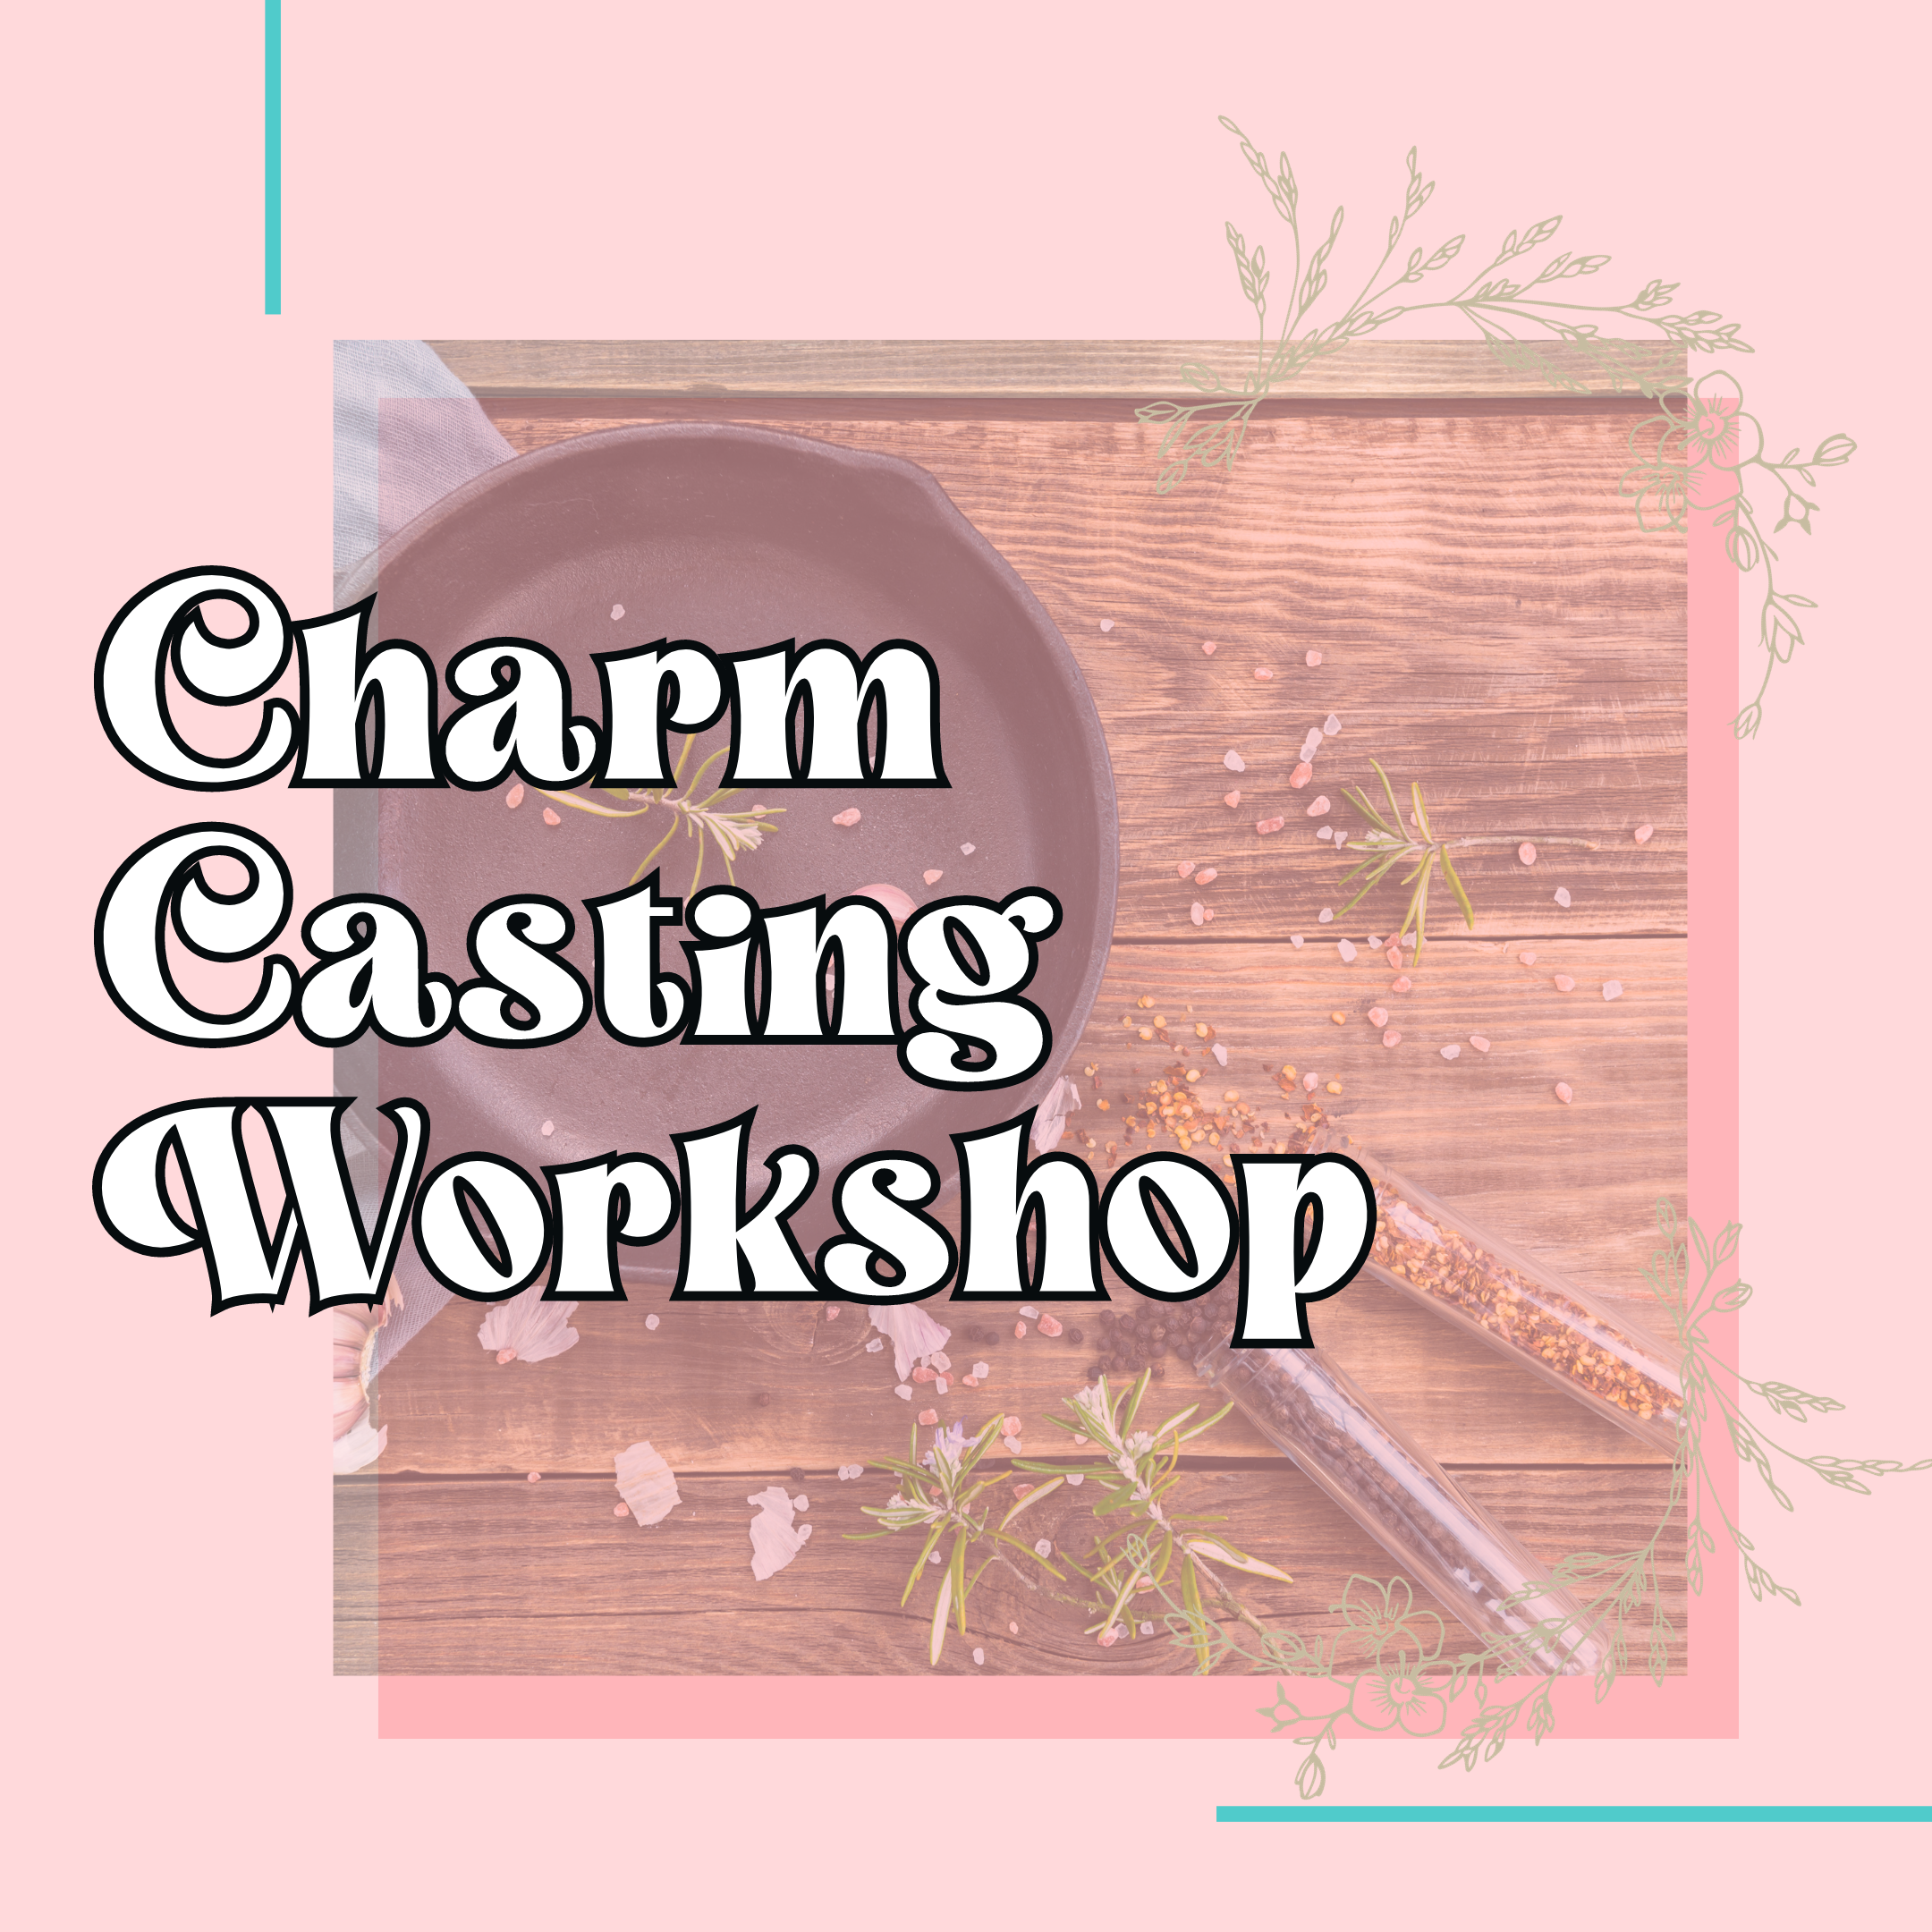 The Art of Charm Casting Workshop